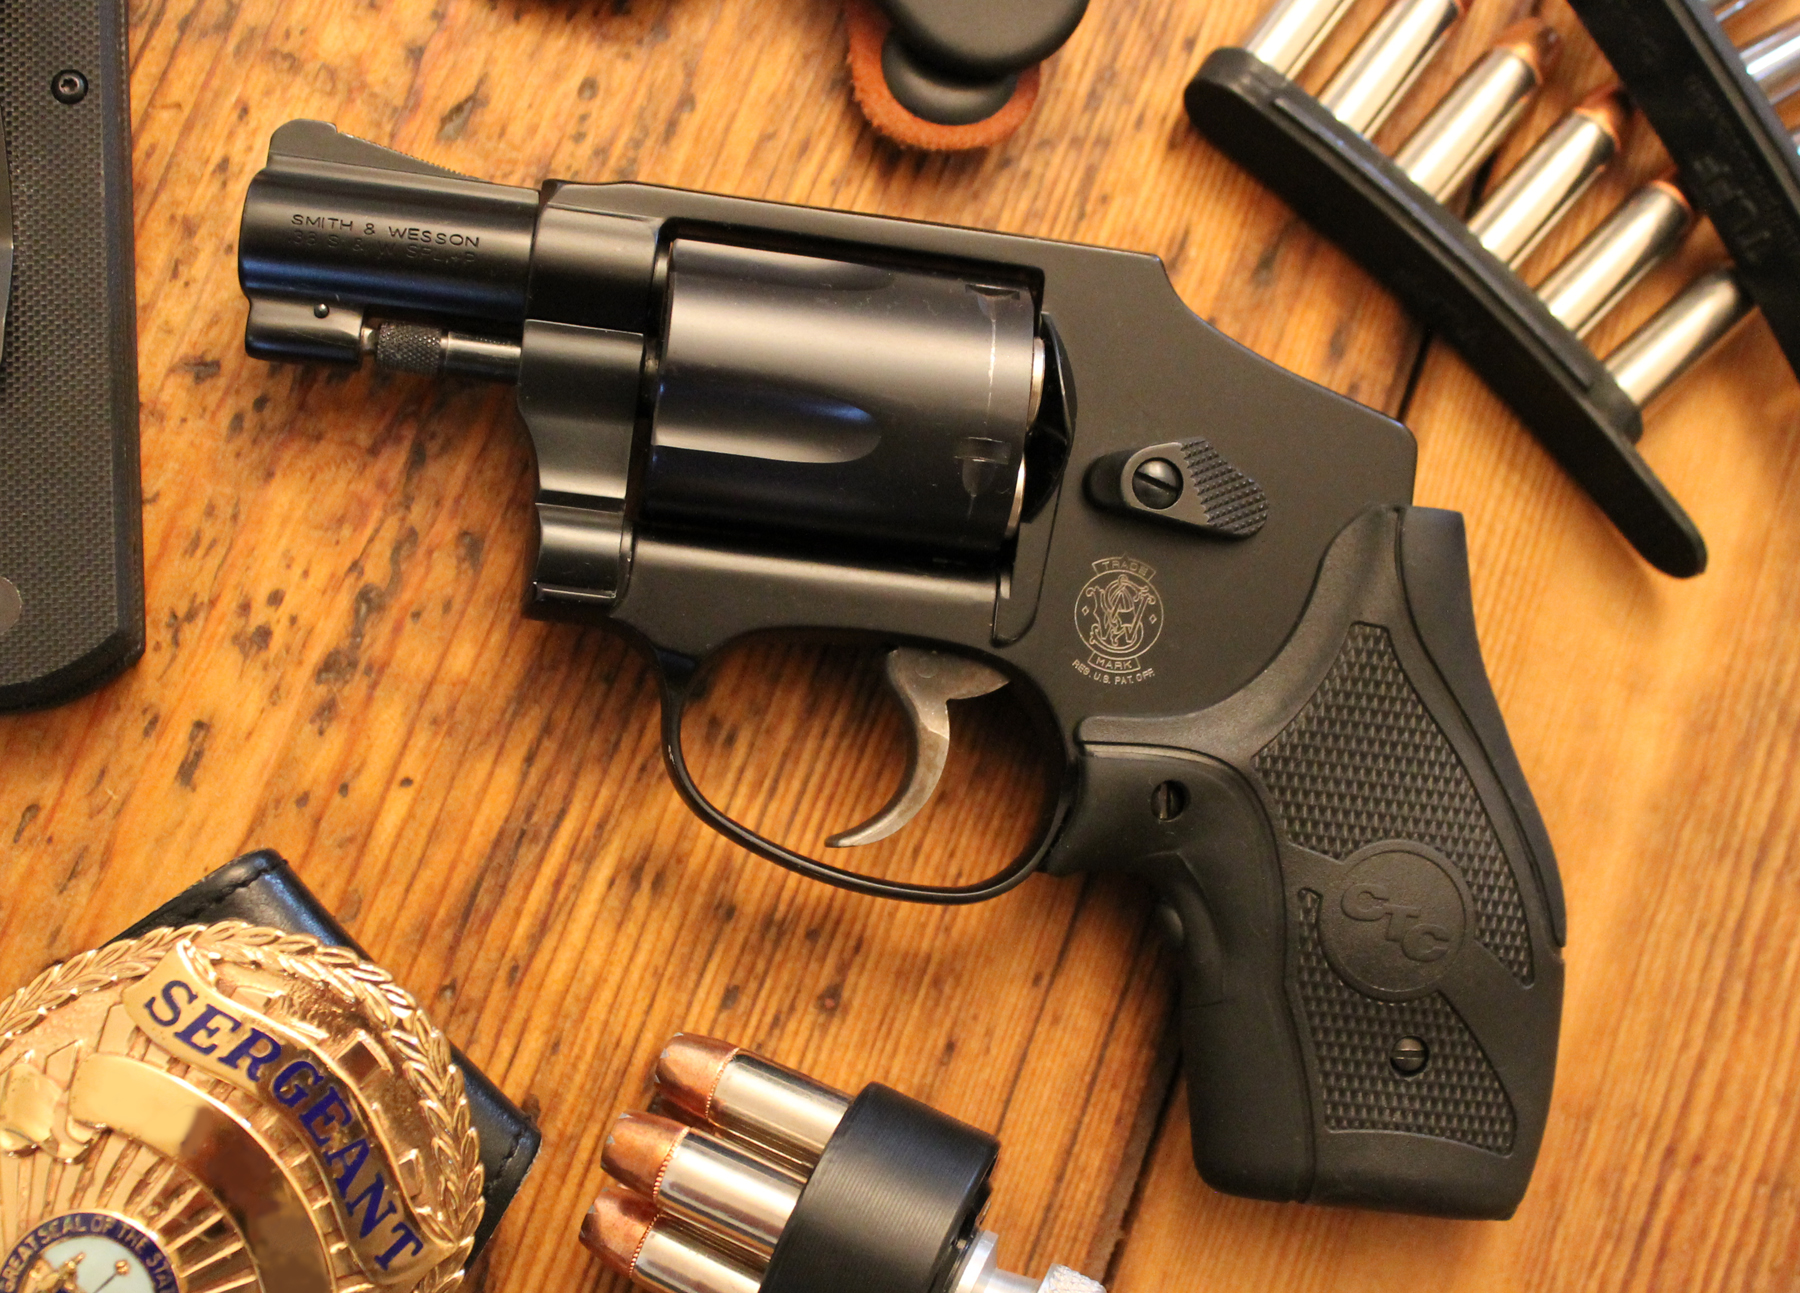 HQ Smith & Wesson Revolver Wallpapers | File 1799.08Kb